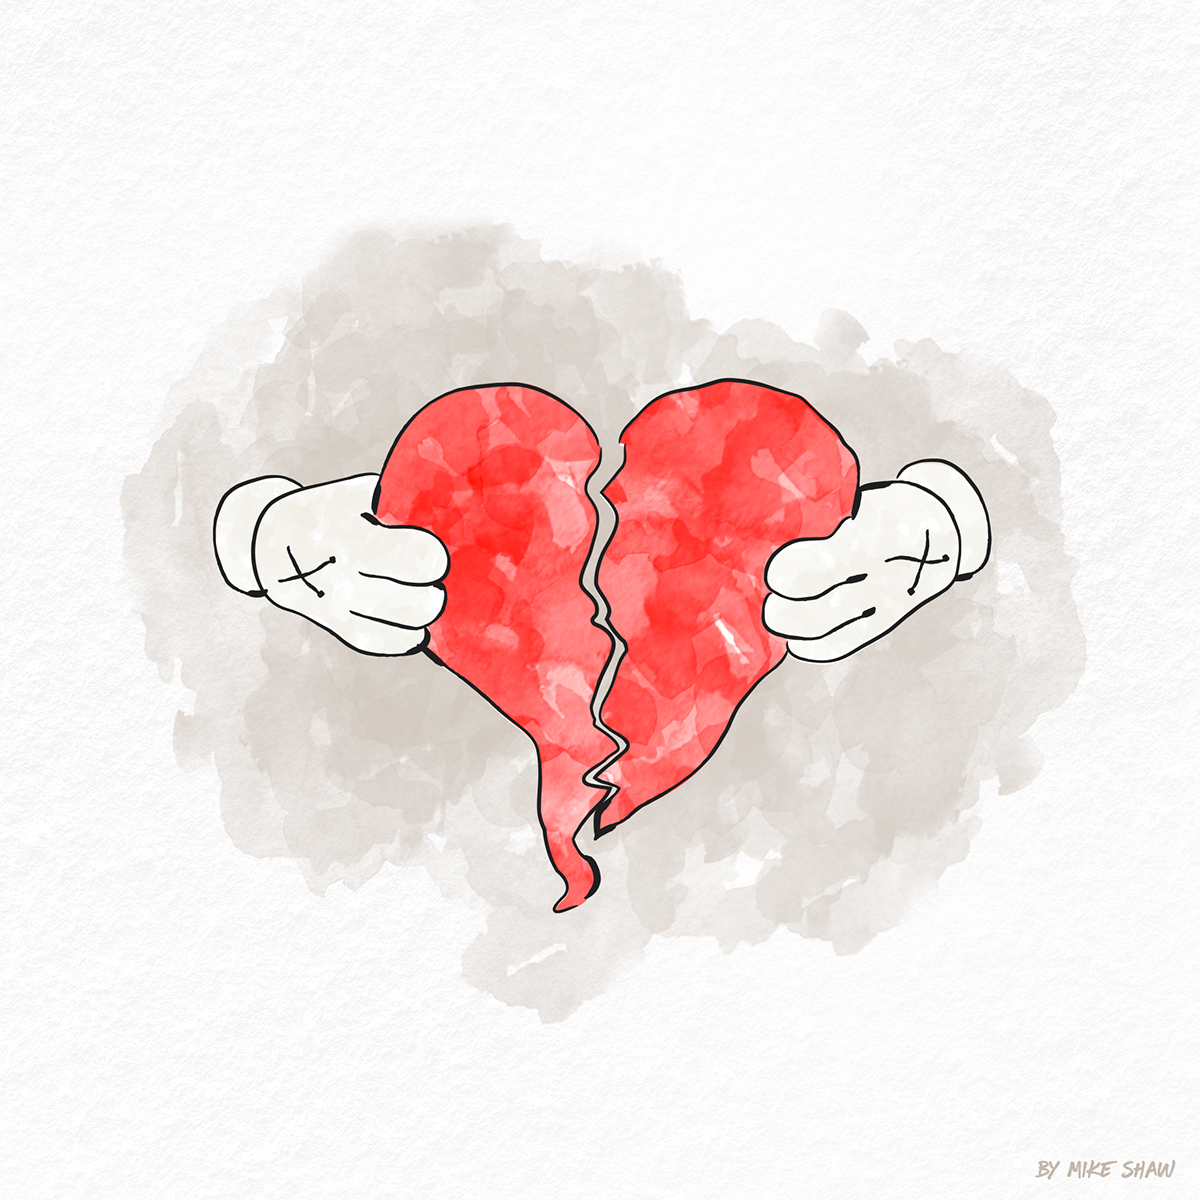 Kanye west 808s and heartbreak download